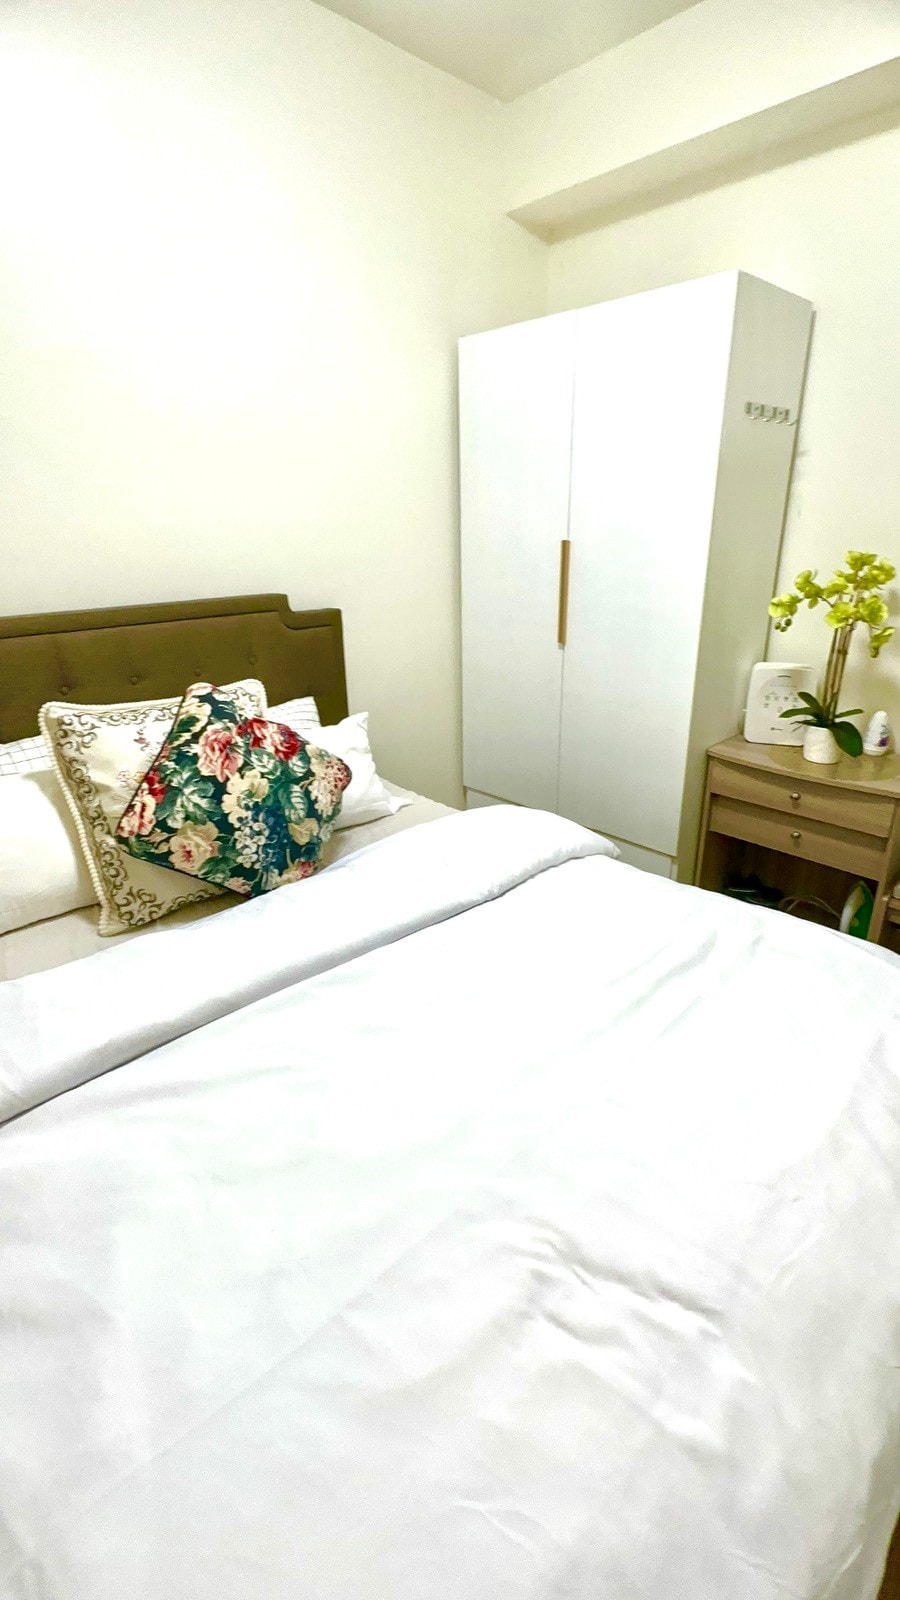 Staycation in Parañaque
The Grace Inn 2BR Condo